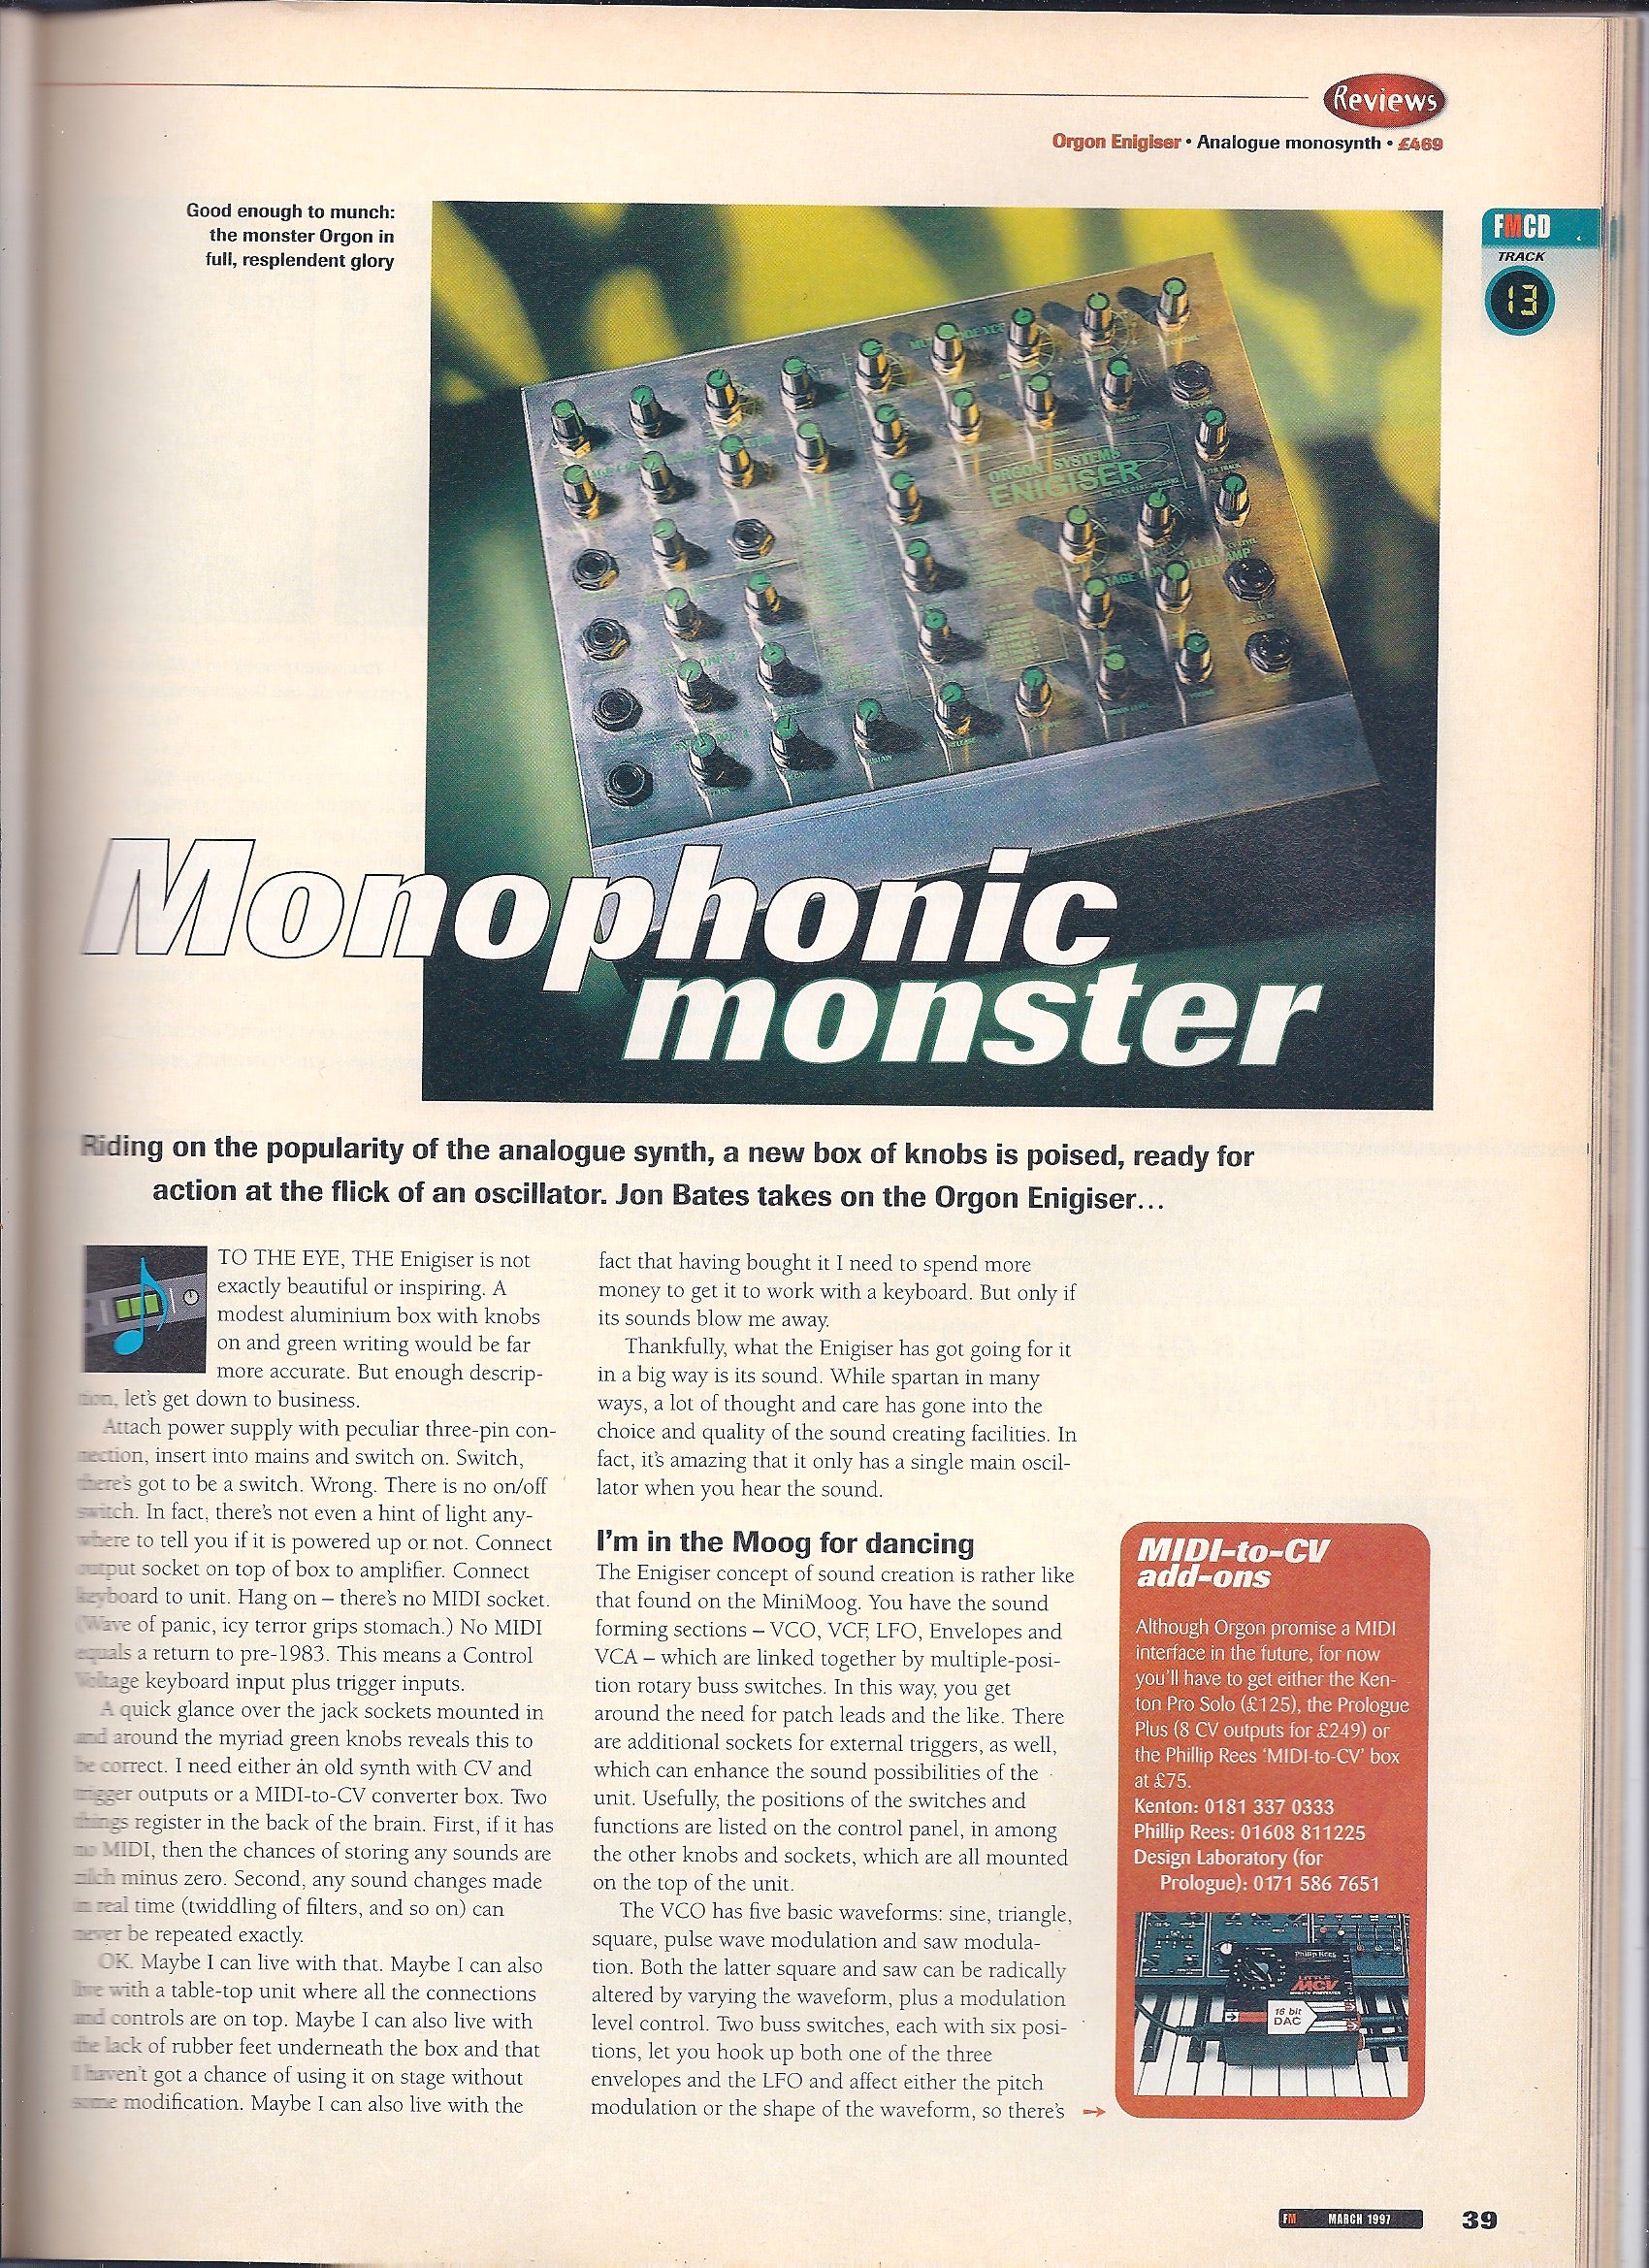 1996 review of the ORGON Enigiser